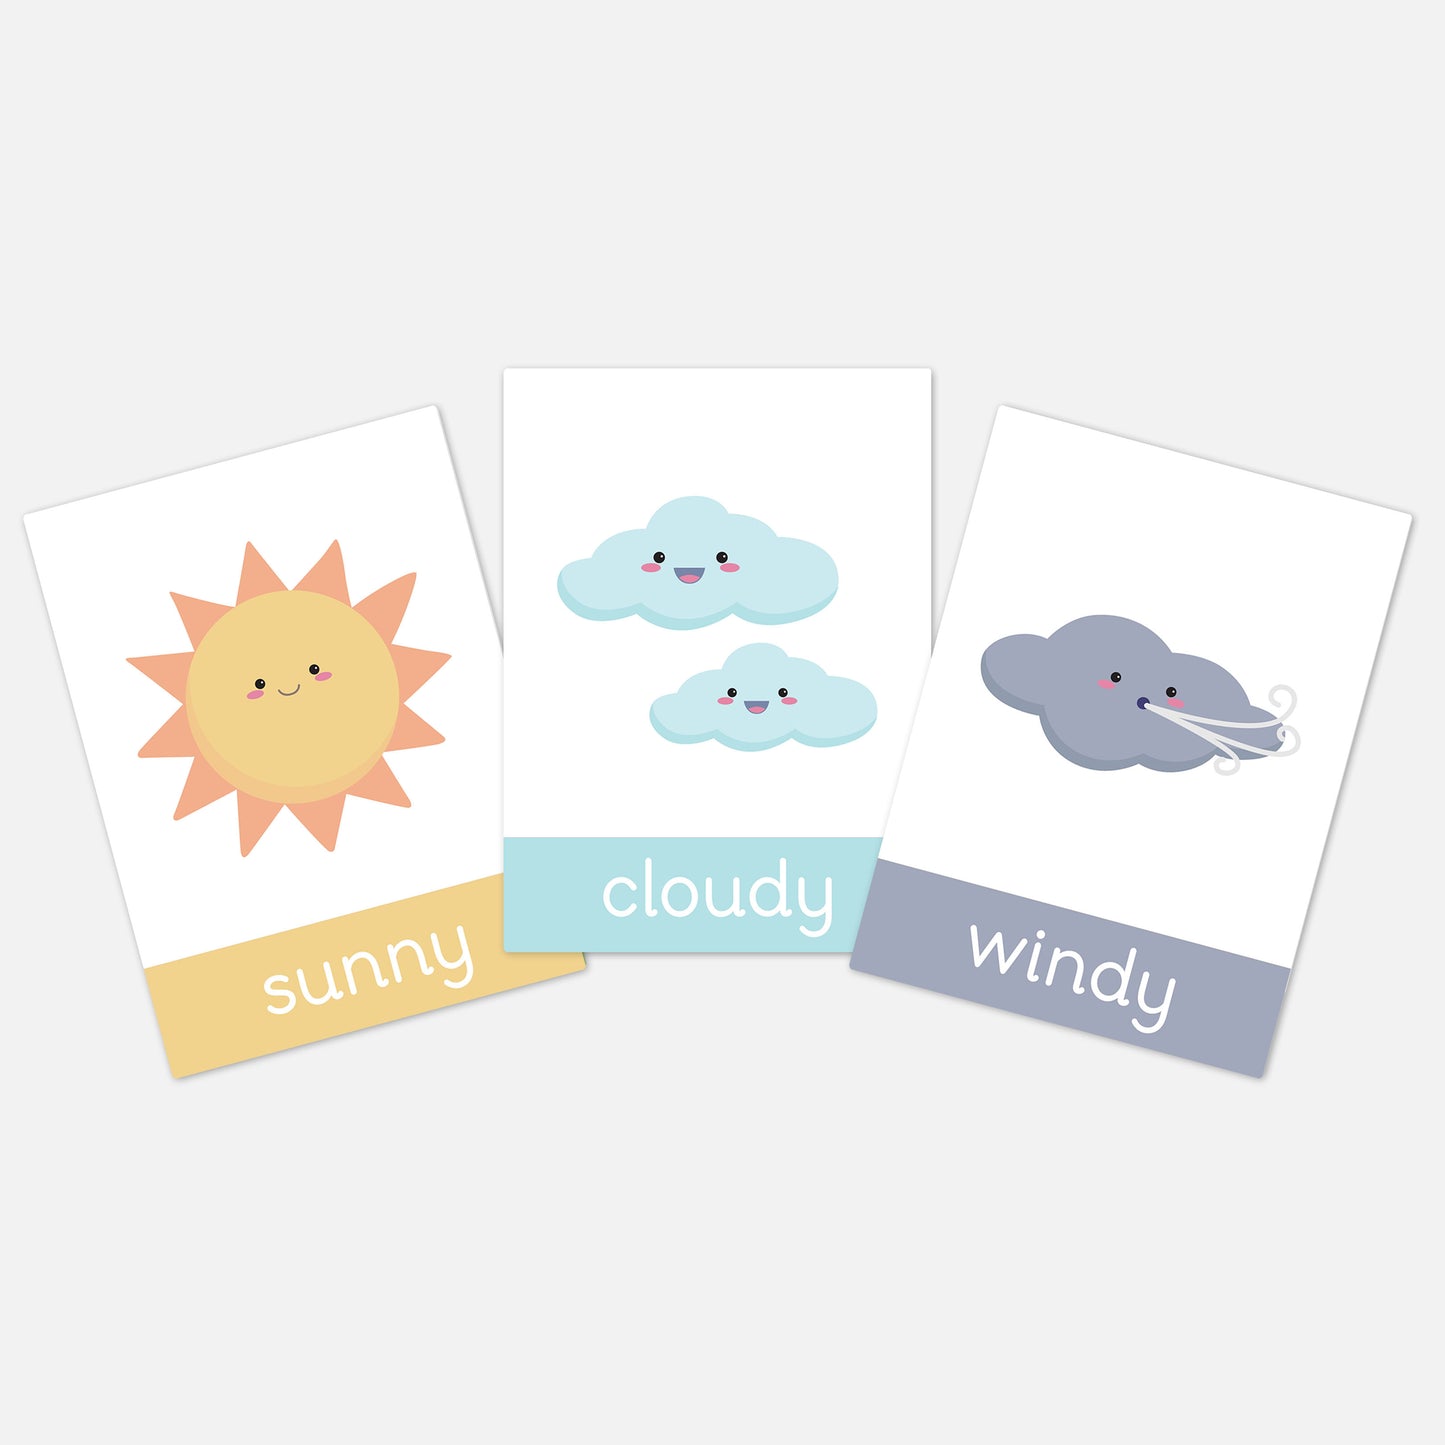 Weather Flashcards | Digital Download-Little Boo Learning-cloudy,flashcards,moon,rainbow,snowy,stars,sun,weather